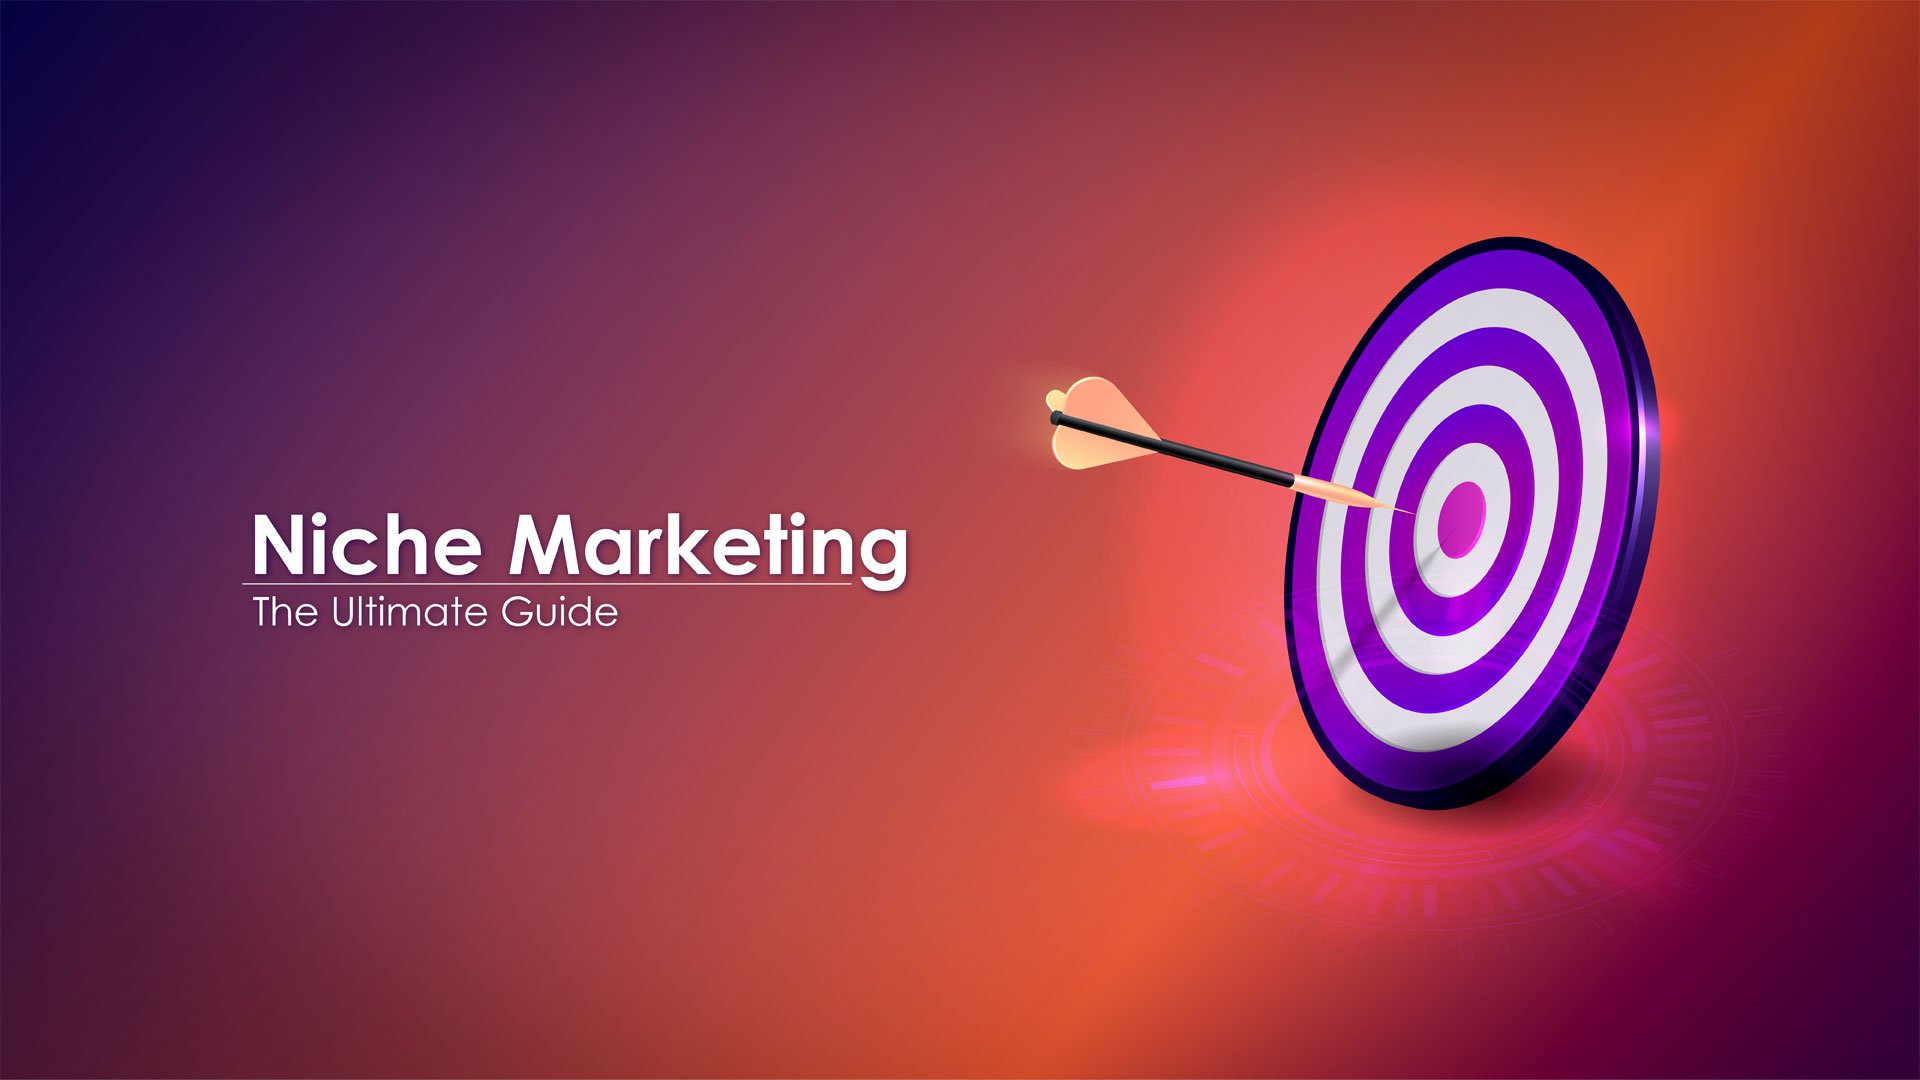 Niche Marketing to Boost Your Business [ The Ultimate Guide]